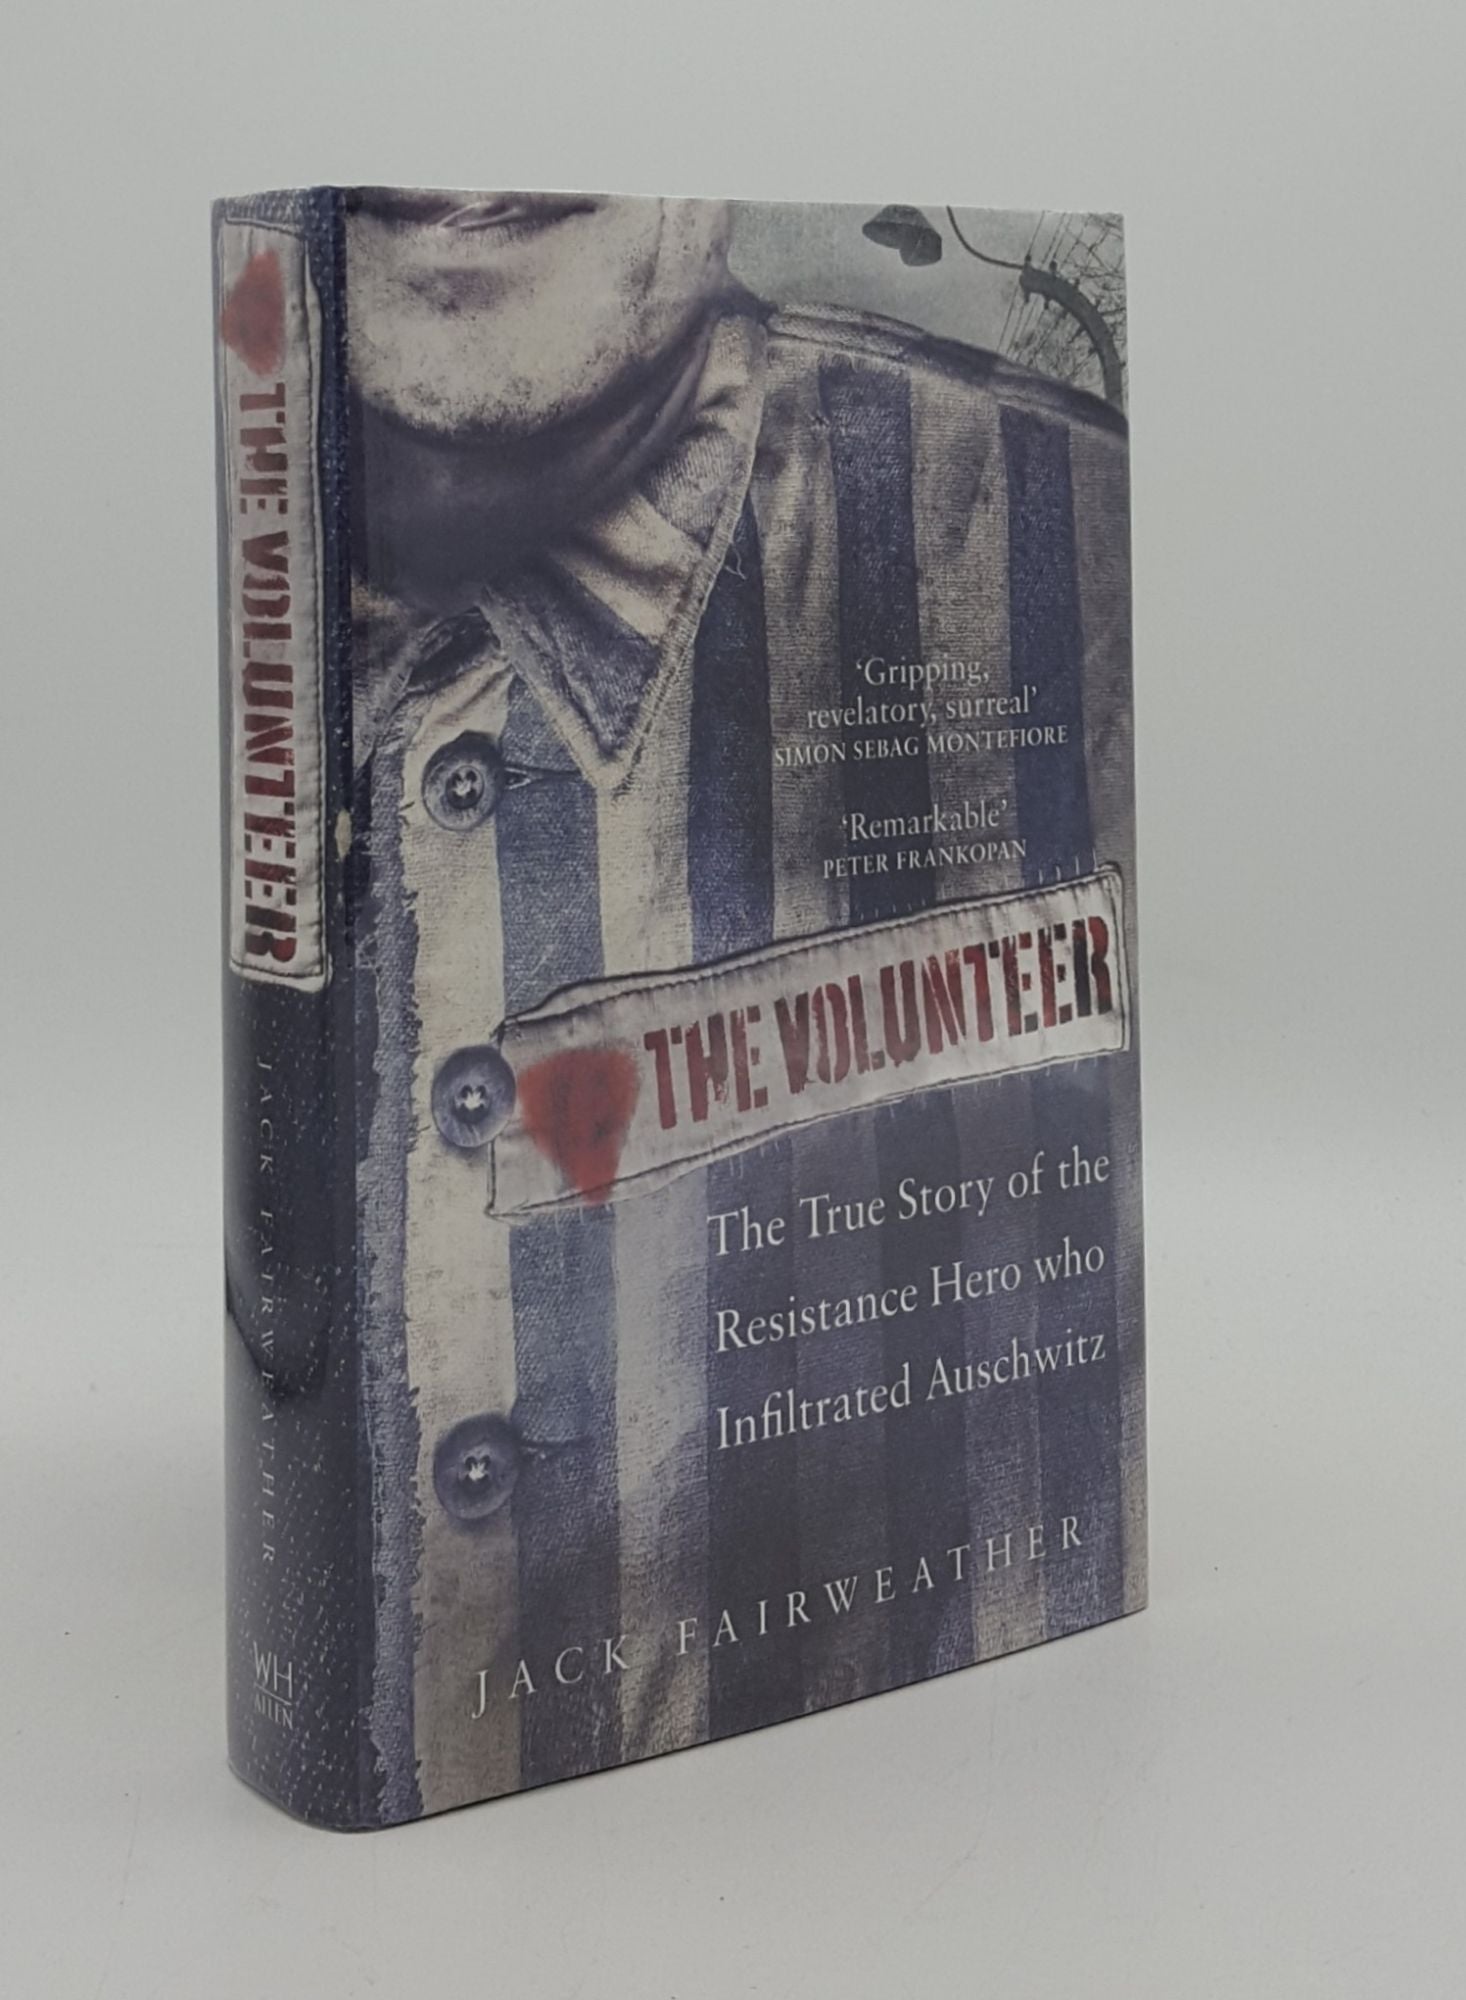 FAIRWEATHER Jack - The Volunteer the True Story of the Resistance Hero Who Infiltrated Auschwitz